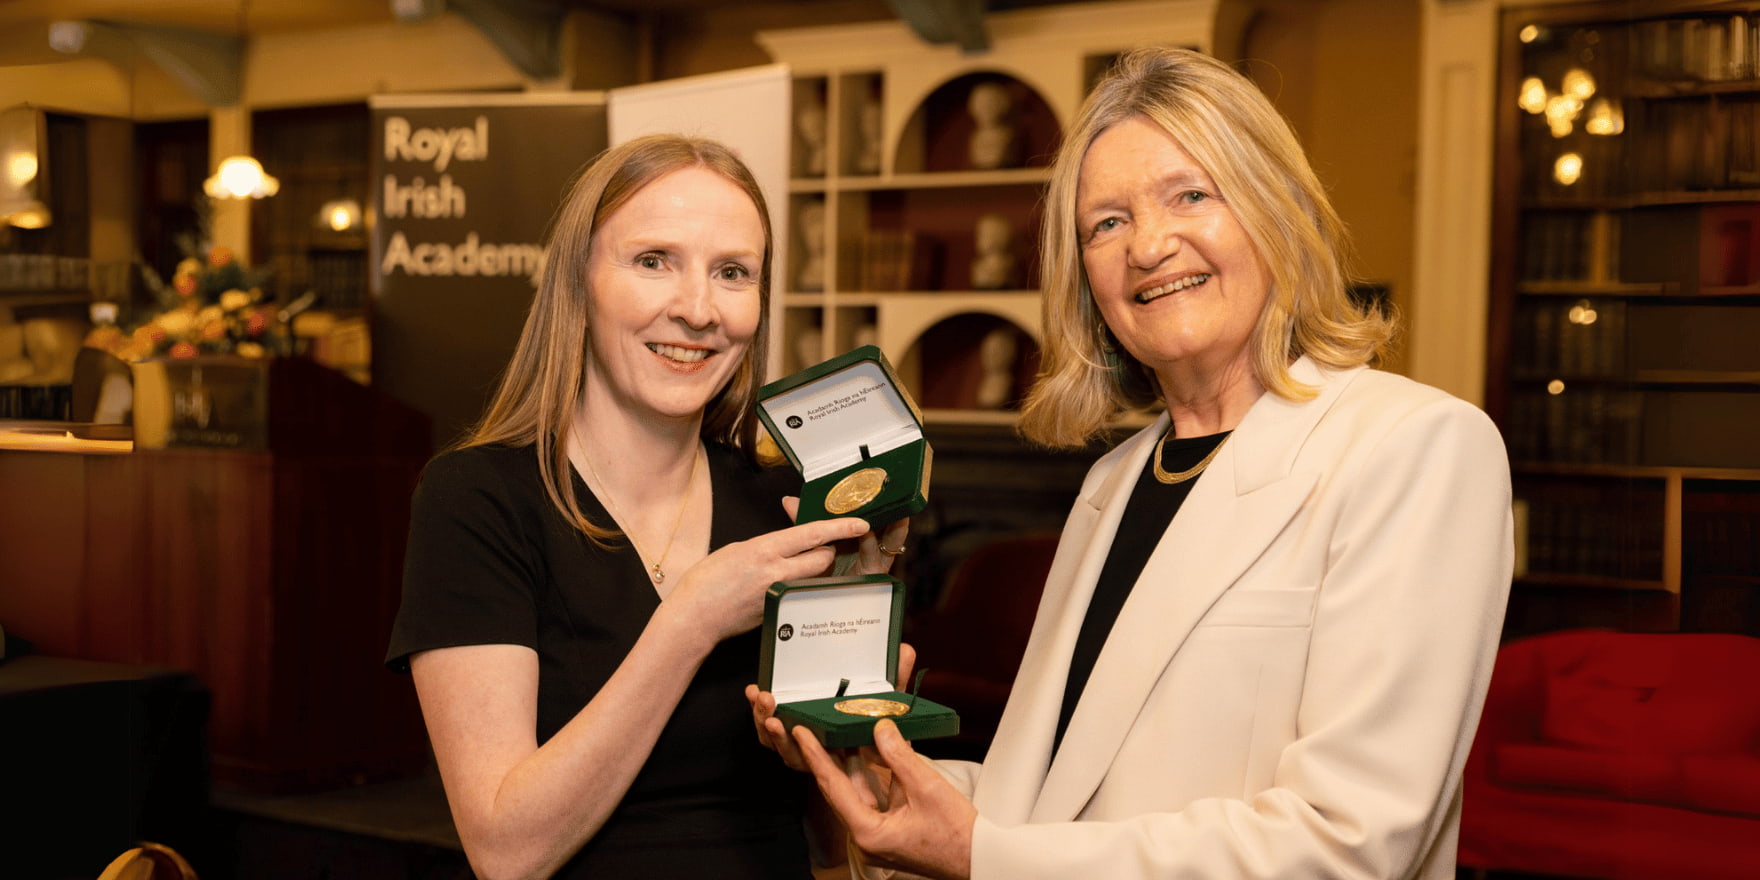 Two females (Máire O’Neill MRIA and Brigid Laffan MRIA) one with auburn hair, the other with blonde smiling at the camera holding two RIA Gold Medals showcased in a green box.